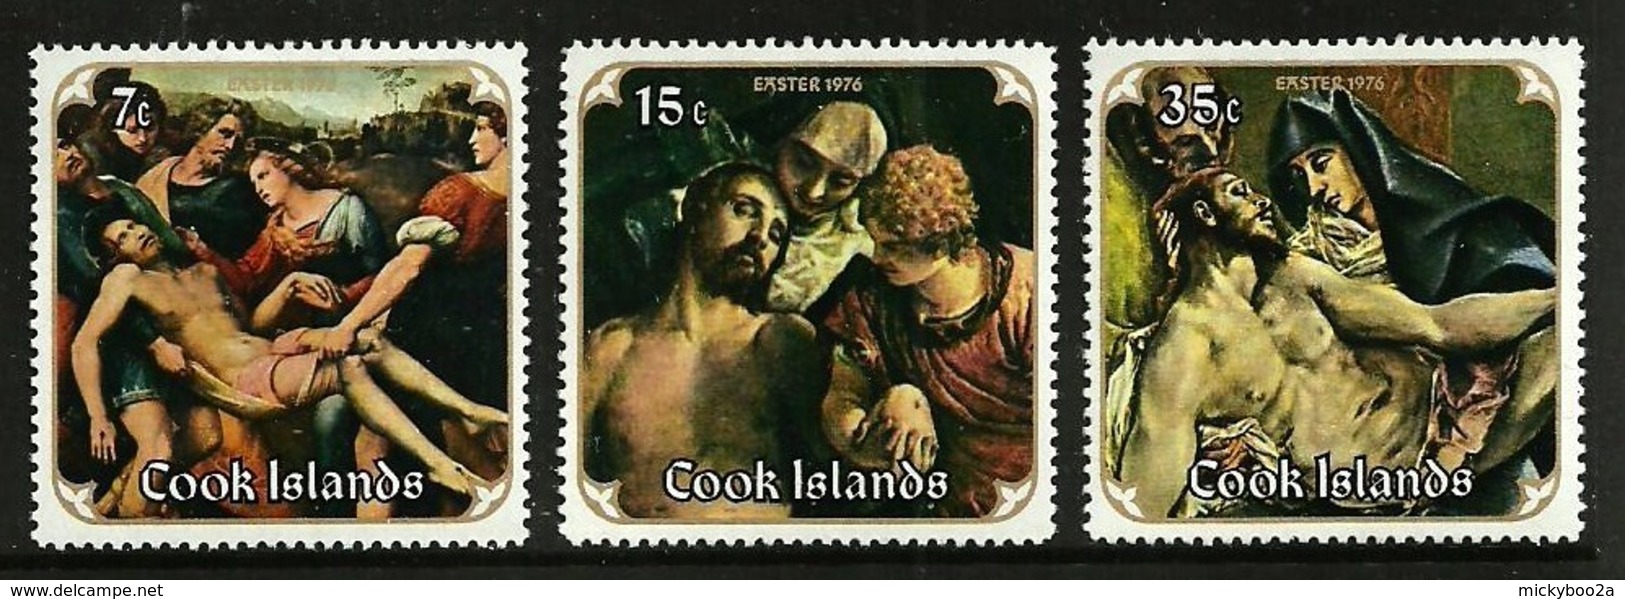 COOK ISLANDS 1976 EASTER ART PAINTINGS SET MNH - Cook